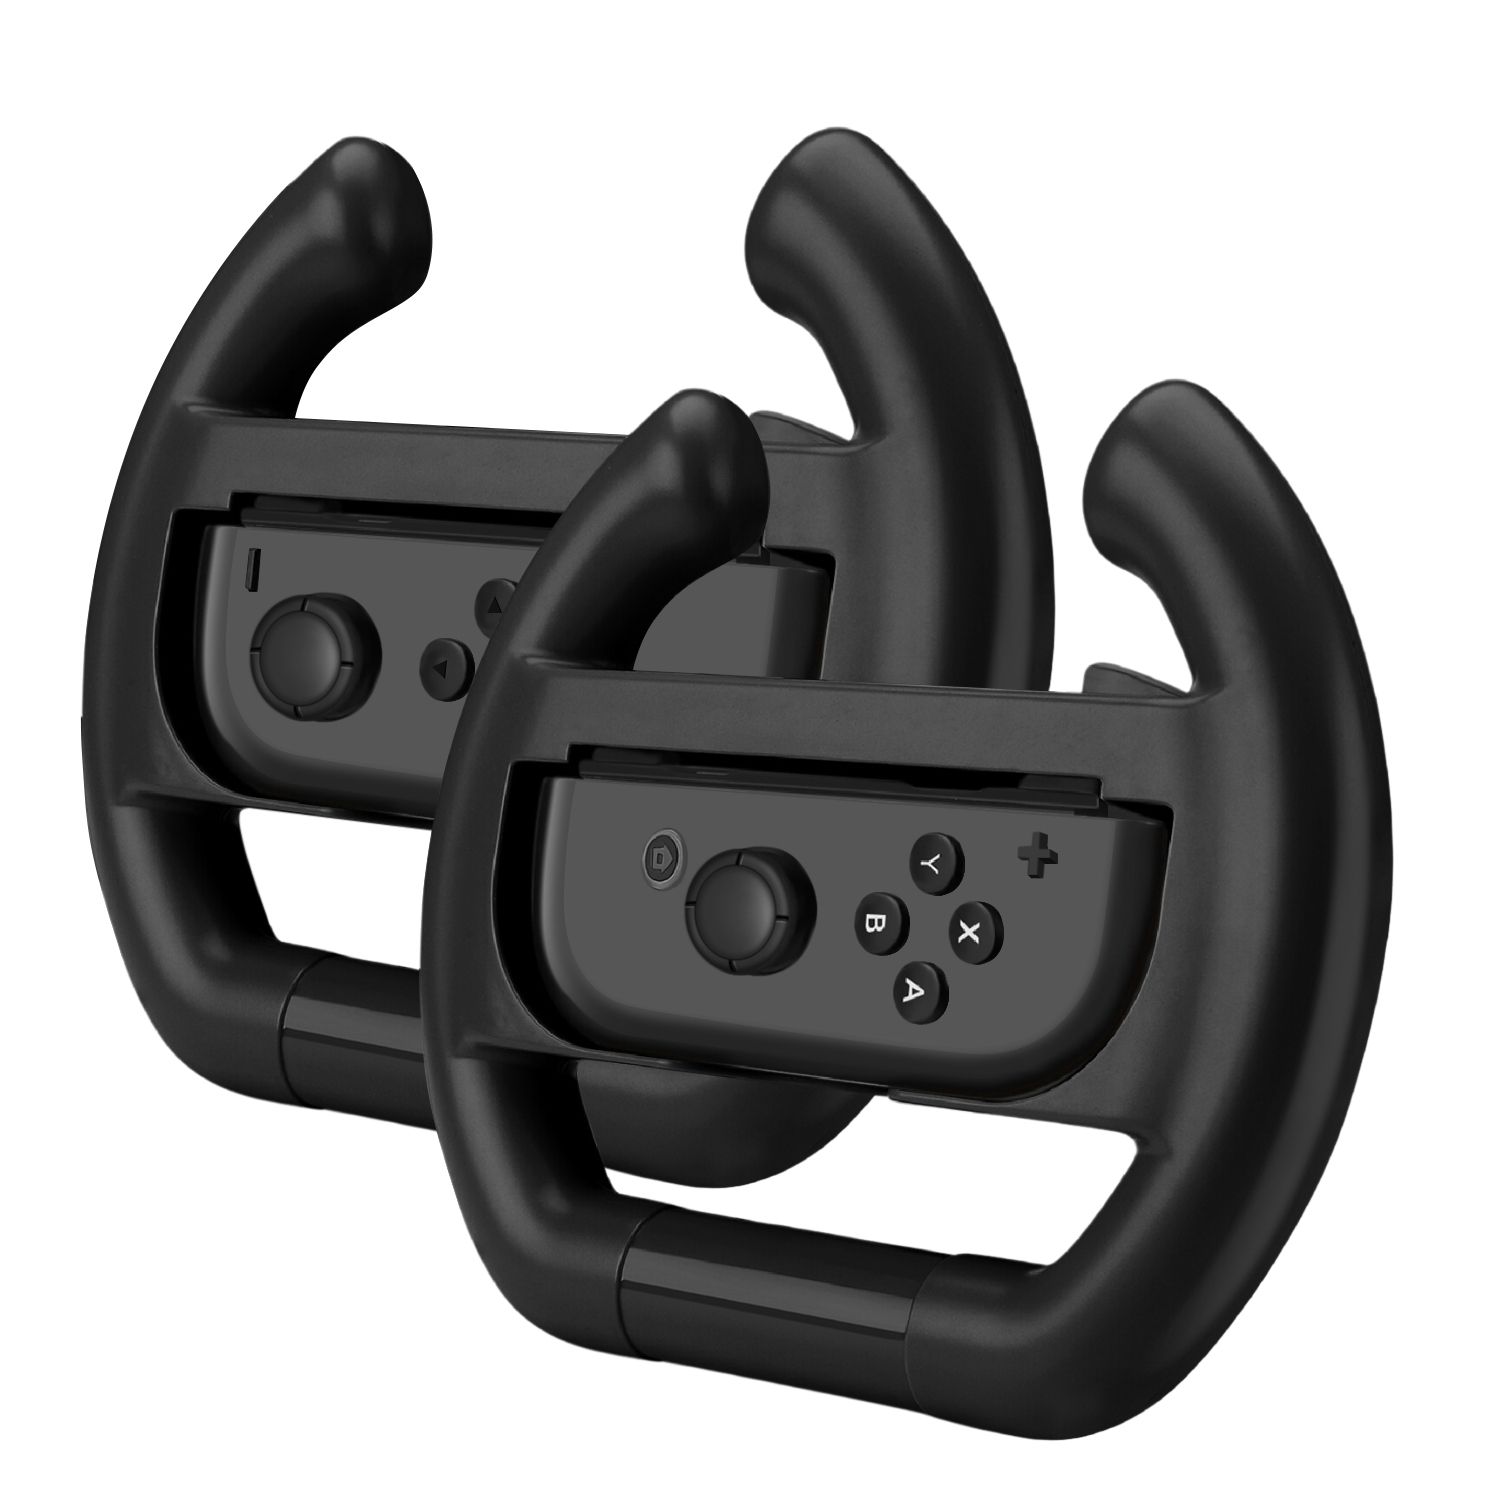 Racing Wheel for Nintendo Switch / Switch OLED Joy-Con Controller (Set of 2 Black) Racing Steering Wheel Controller Accessory Grip Handle Kit Attachment